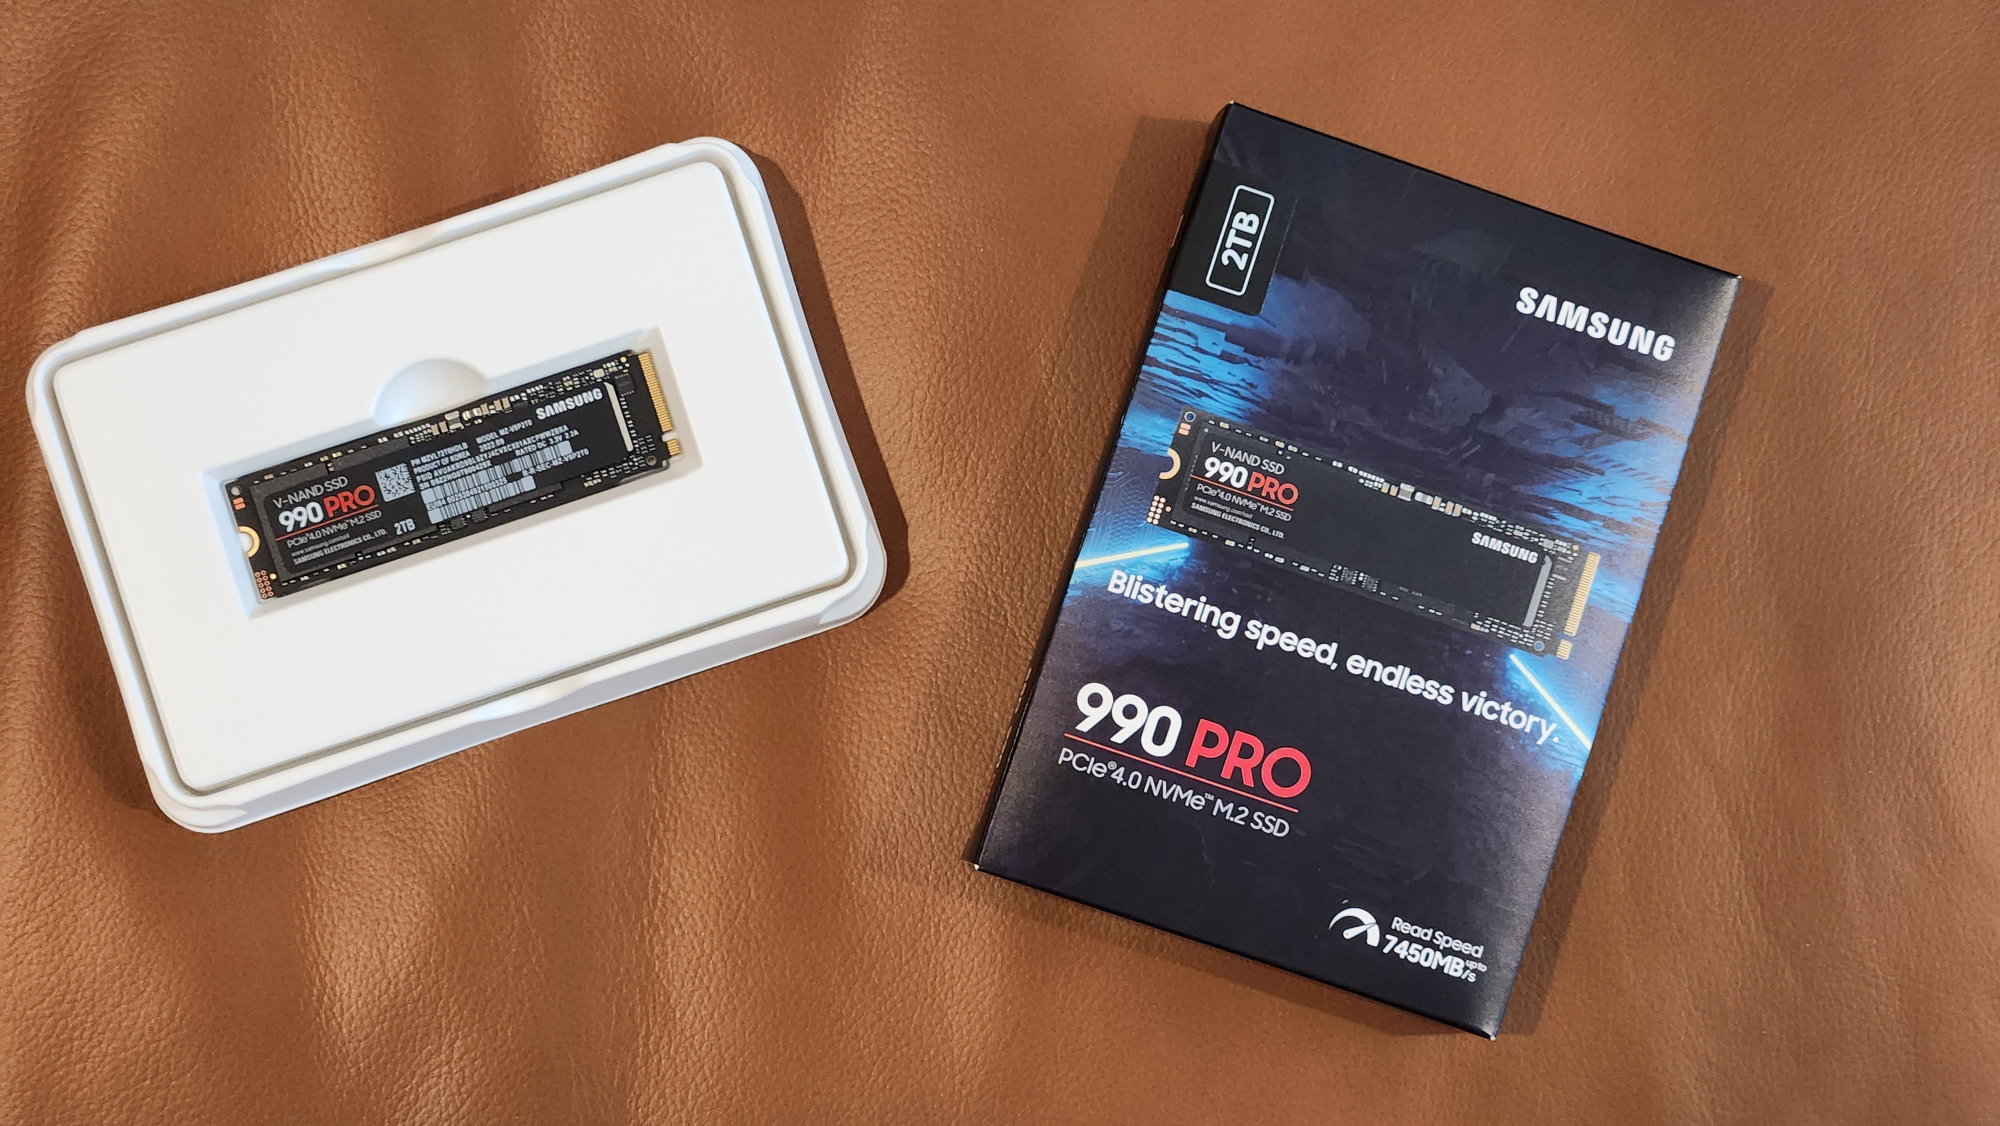 Samsung 990 Pro SSD Is Getting a 4TB Upgrade